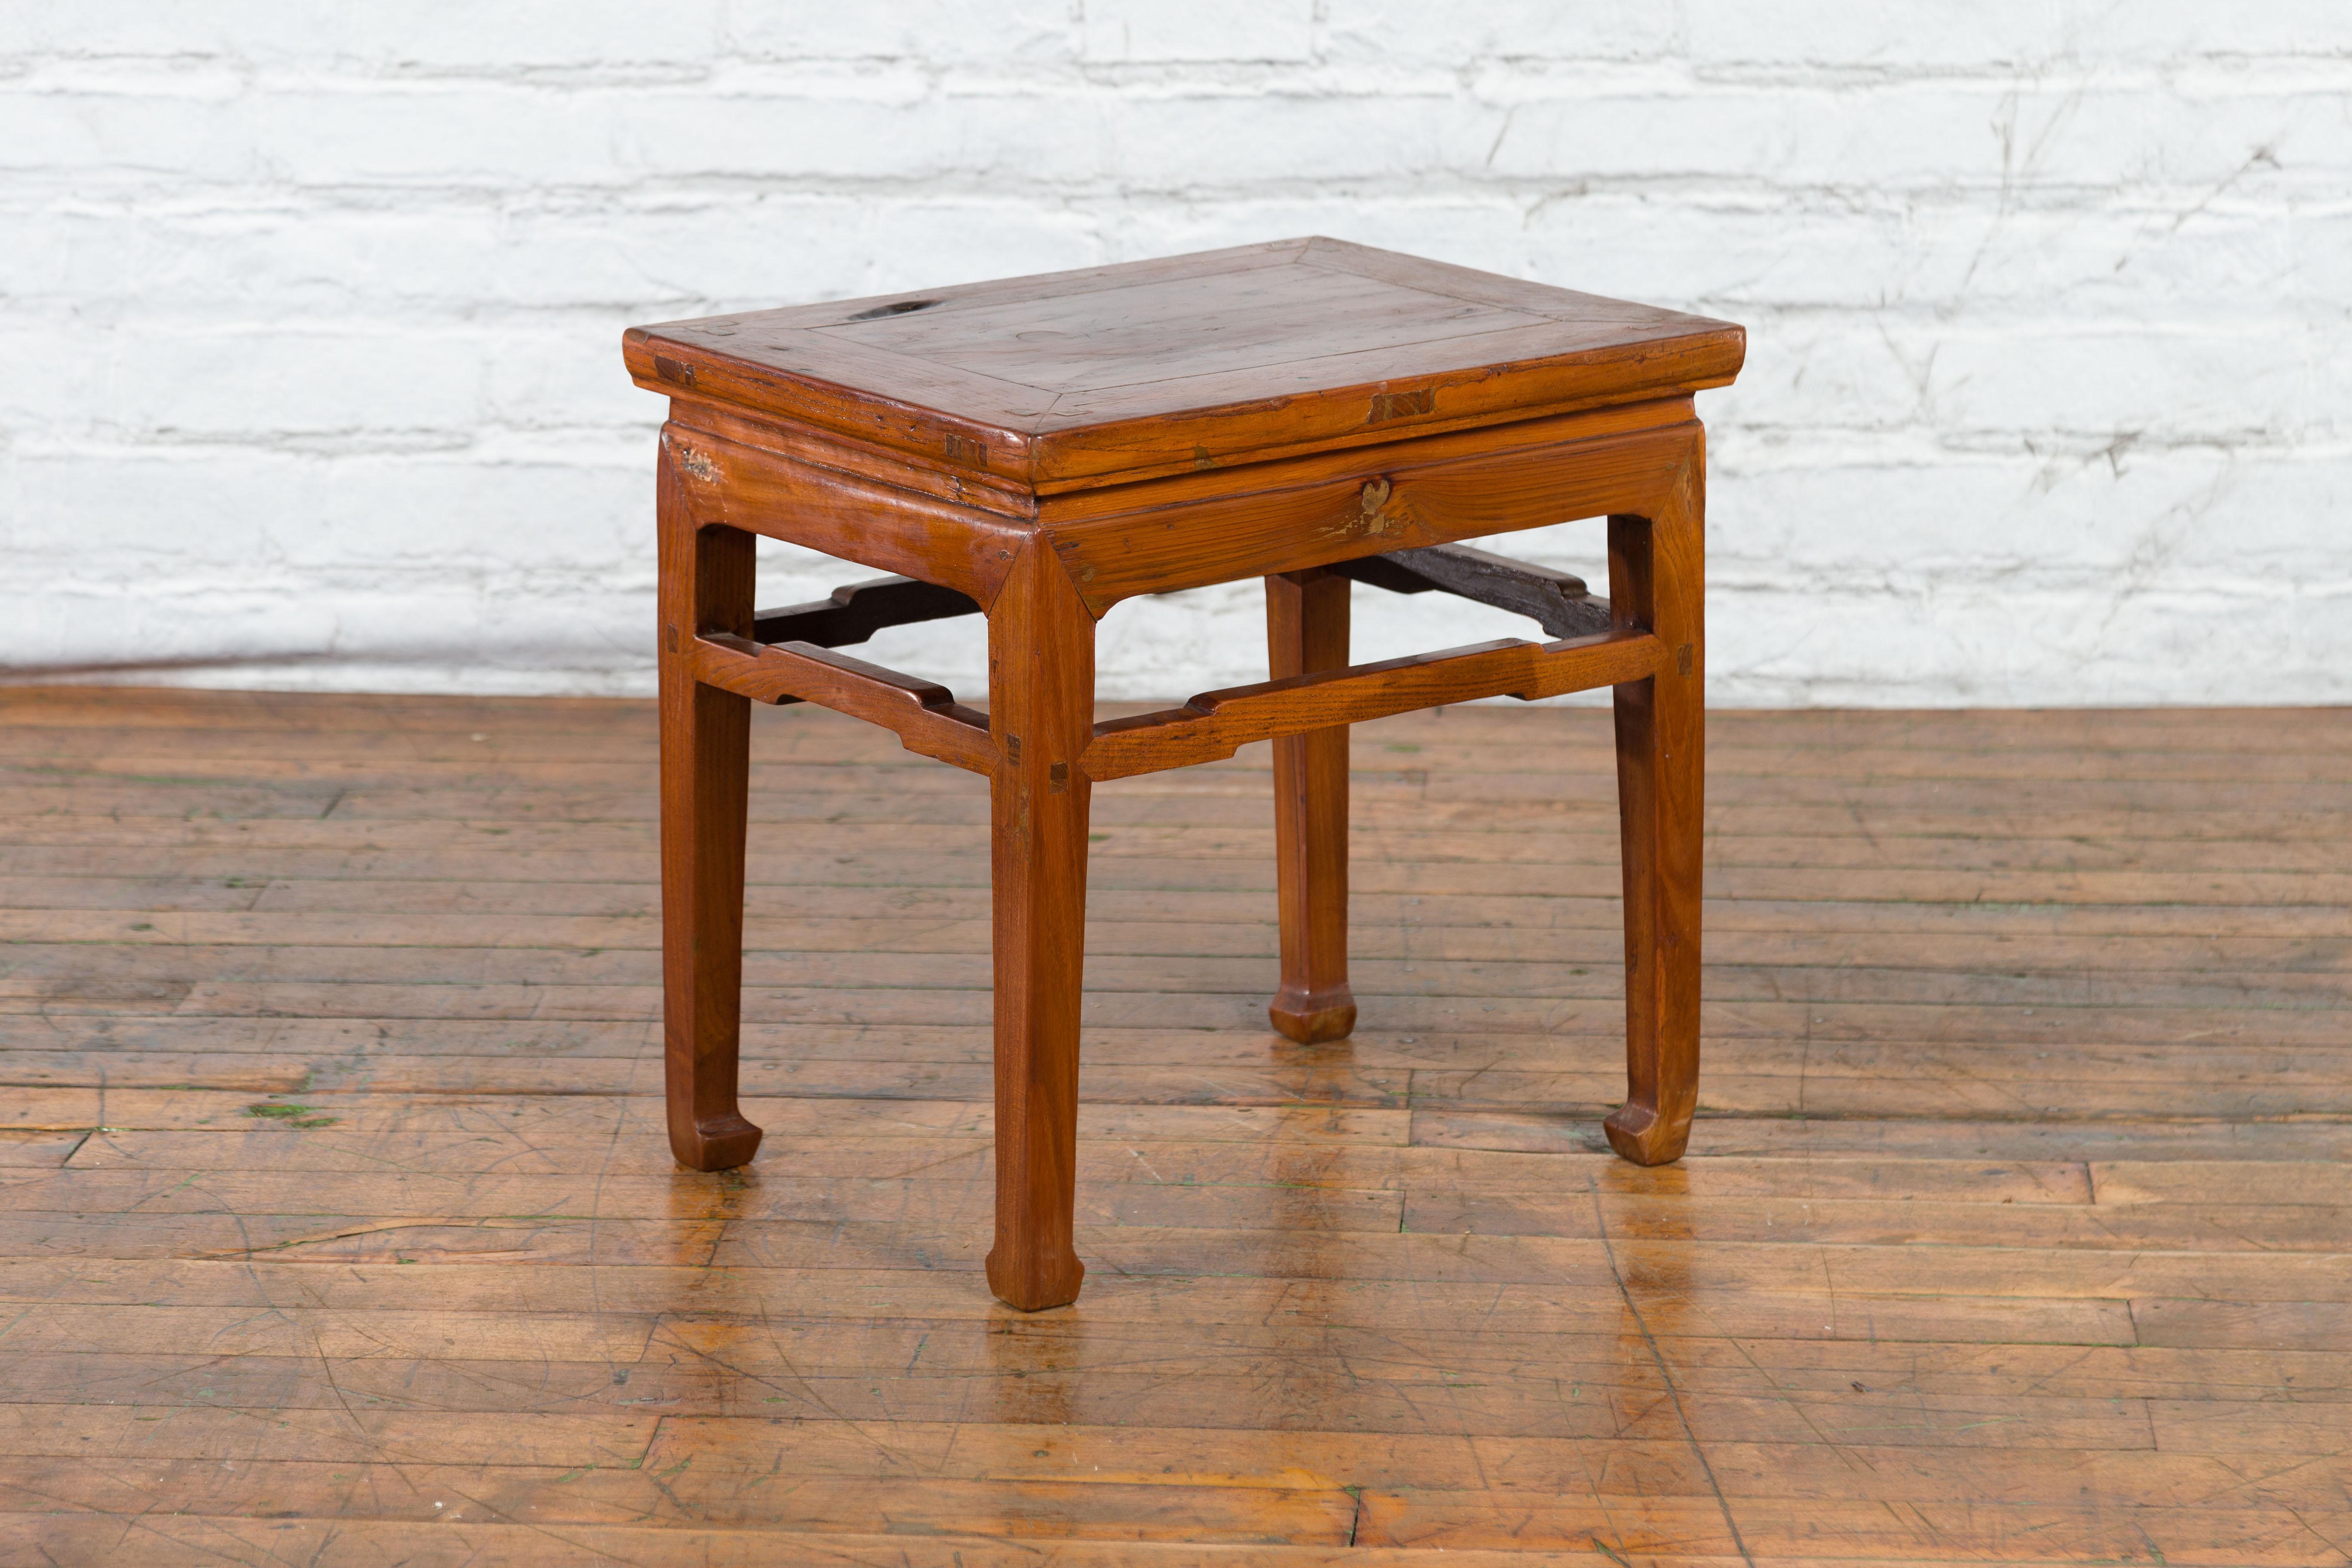 Chinese Qing Dynasty 19th Century Side Table with Humpback Stretchers For Sale 6